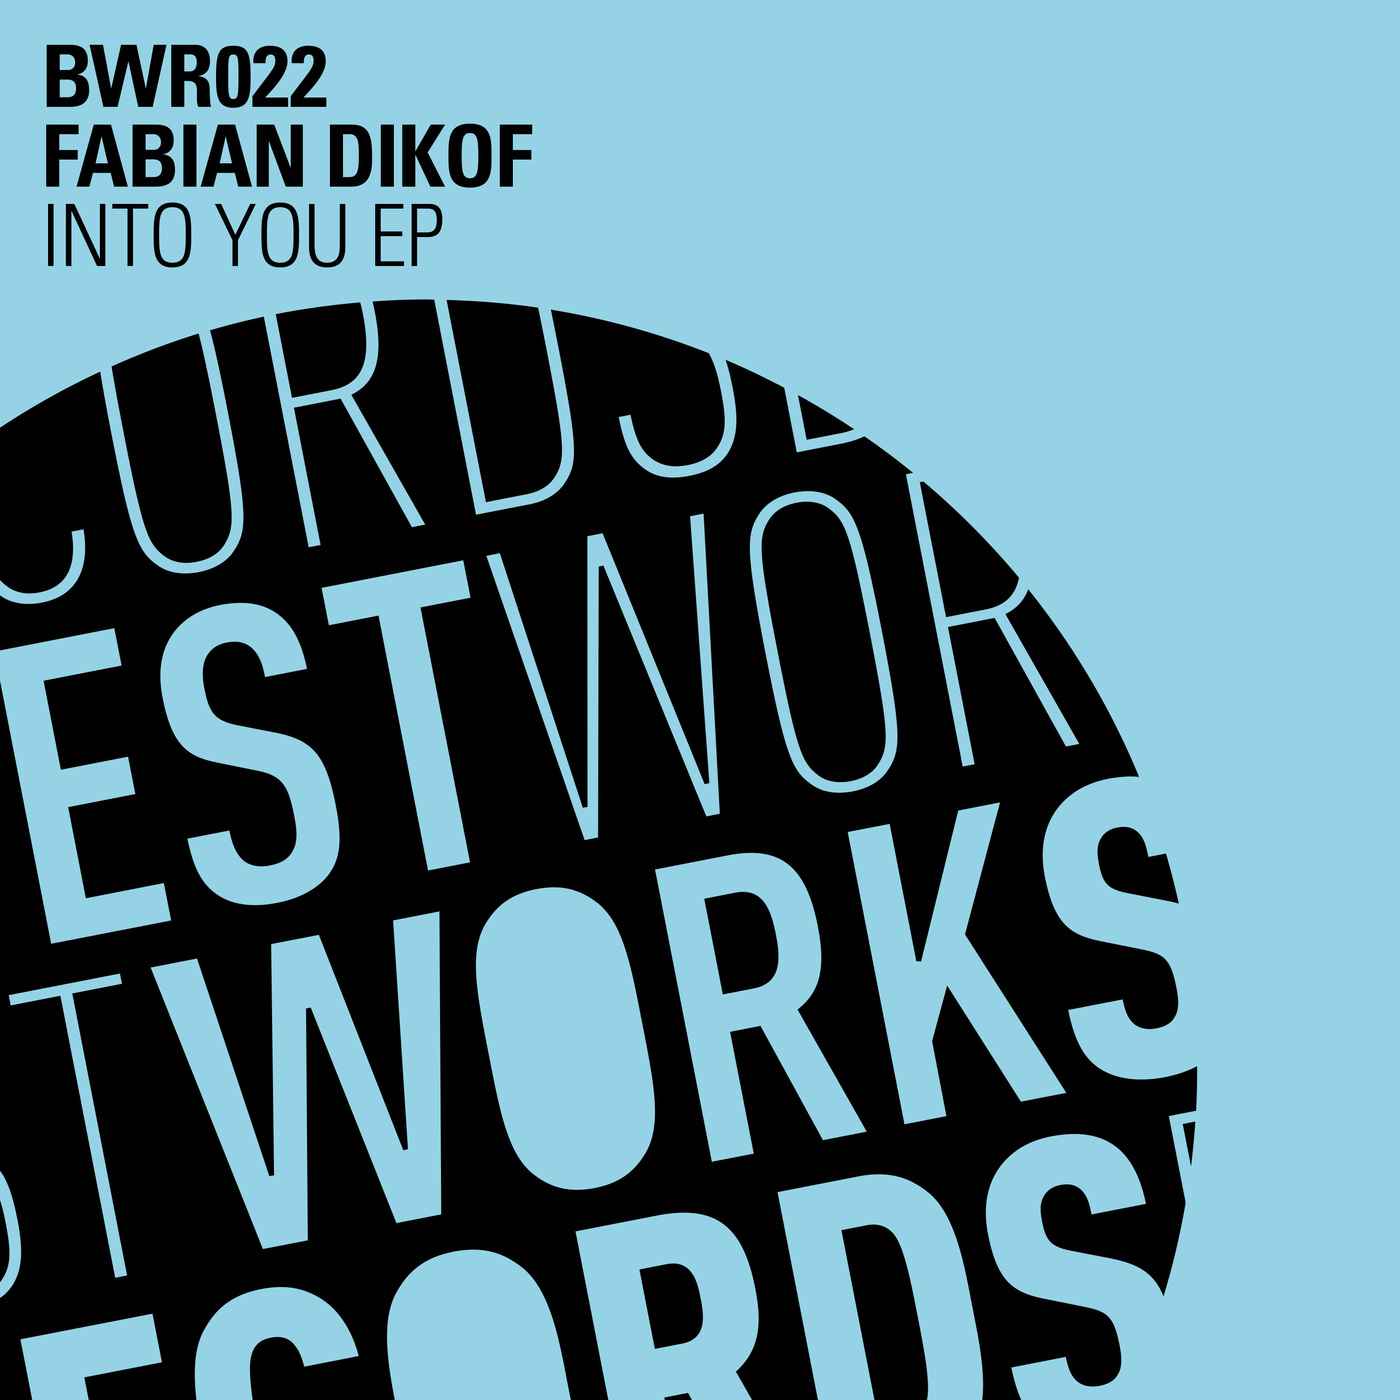 Fabian Dikof - Into You EP / Best Works Records